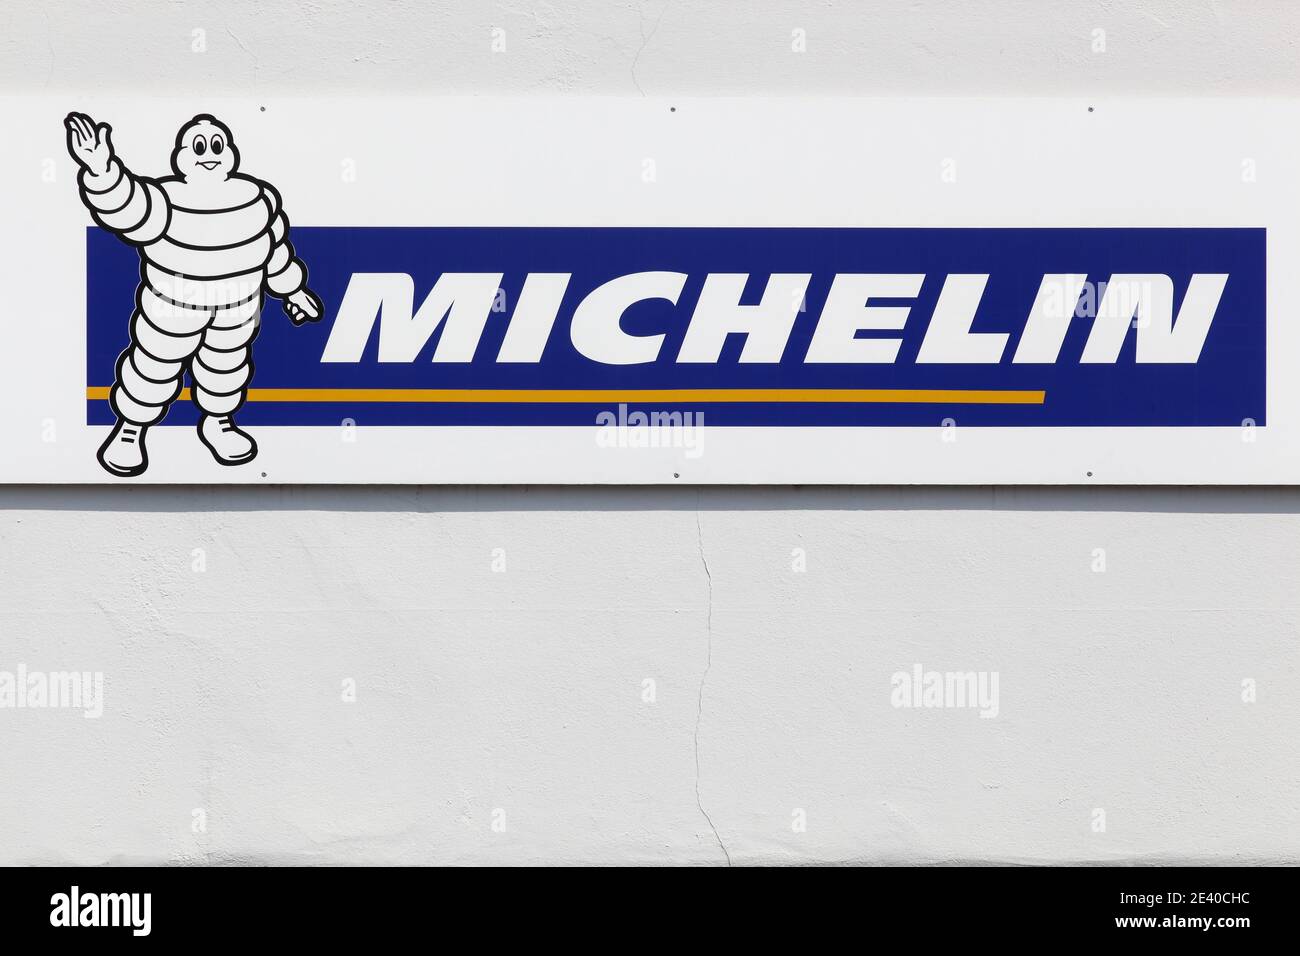 Munster, Germany - July 22, 2018: Michelin logo on a wall. Michelin is a tire manufacturer based in Clermont-Ferrand in France Stock Photo